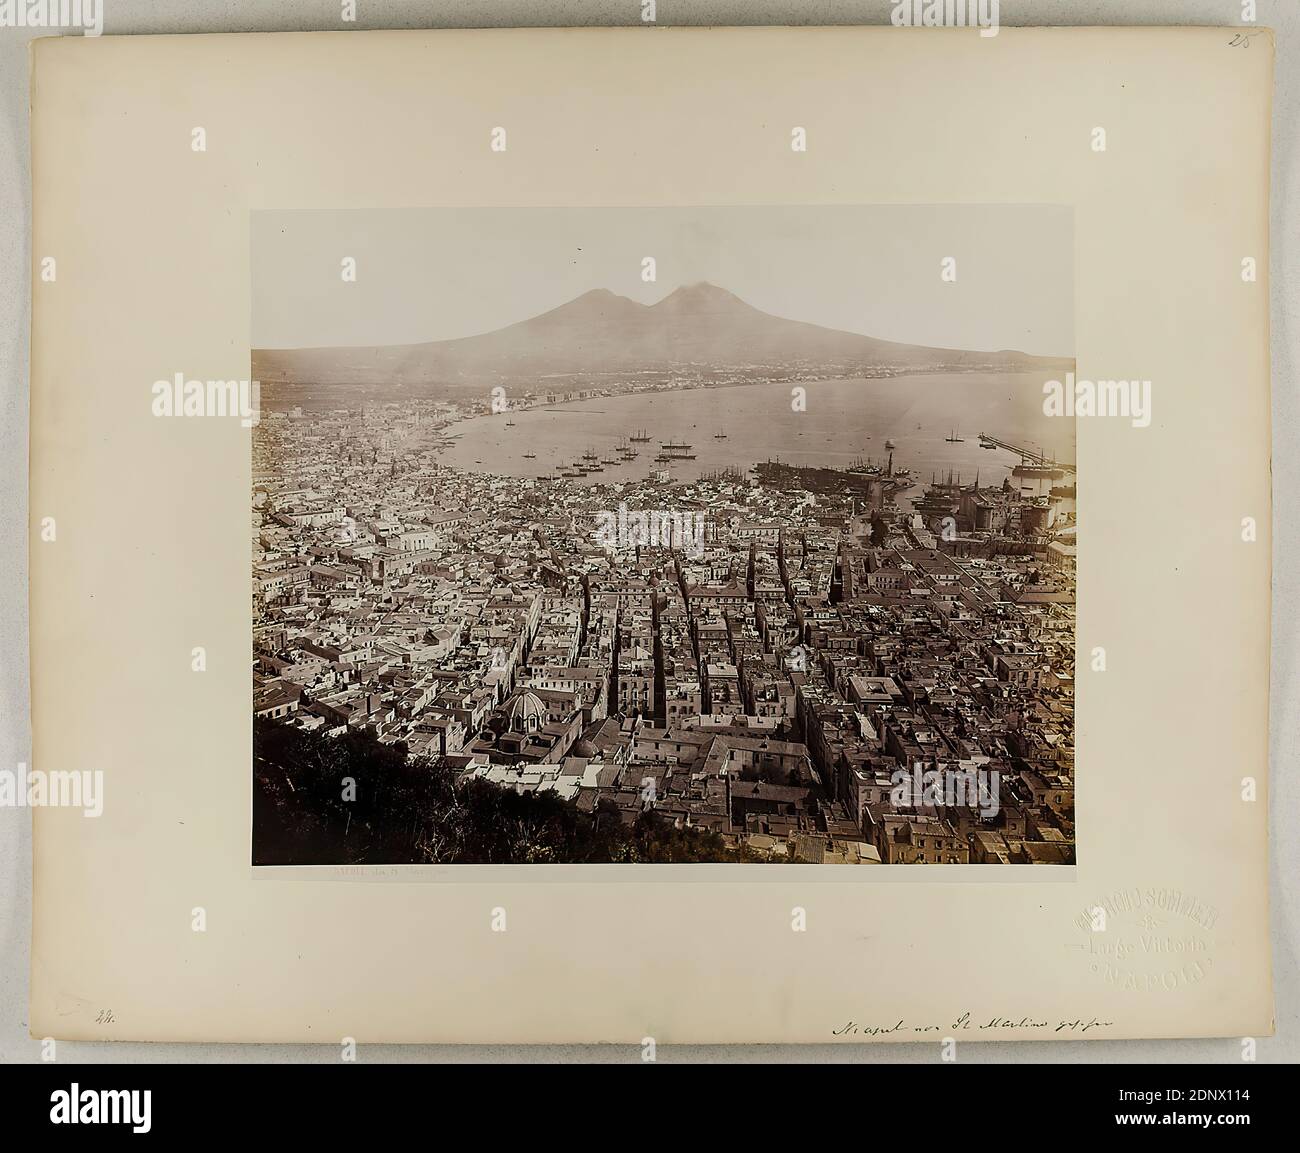 Giorgio Sommer, Napoli da S. Martino, albumin paper, black and white positive process, sheet size: height: 20.50 cm; width: 25.20 cm, inscribed: recto and: exposed: 1103rd NAPOLI da S. Martino, as well as handwritten on the box: Naples seen from St. Martino, numbered: 22, 25, dry stamp: recto and re. on the carton: GIORGIO SOMMER, Largo Vittoria, NAPOLI, stamp: verso on the carton: inventory, travel photography, landscape photography, town, city view (veduta), coast, landscape with plants, mountains Stock Photo